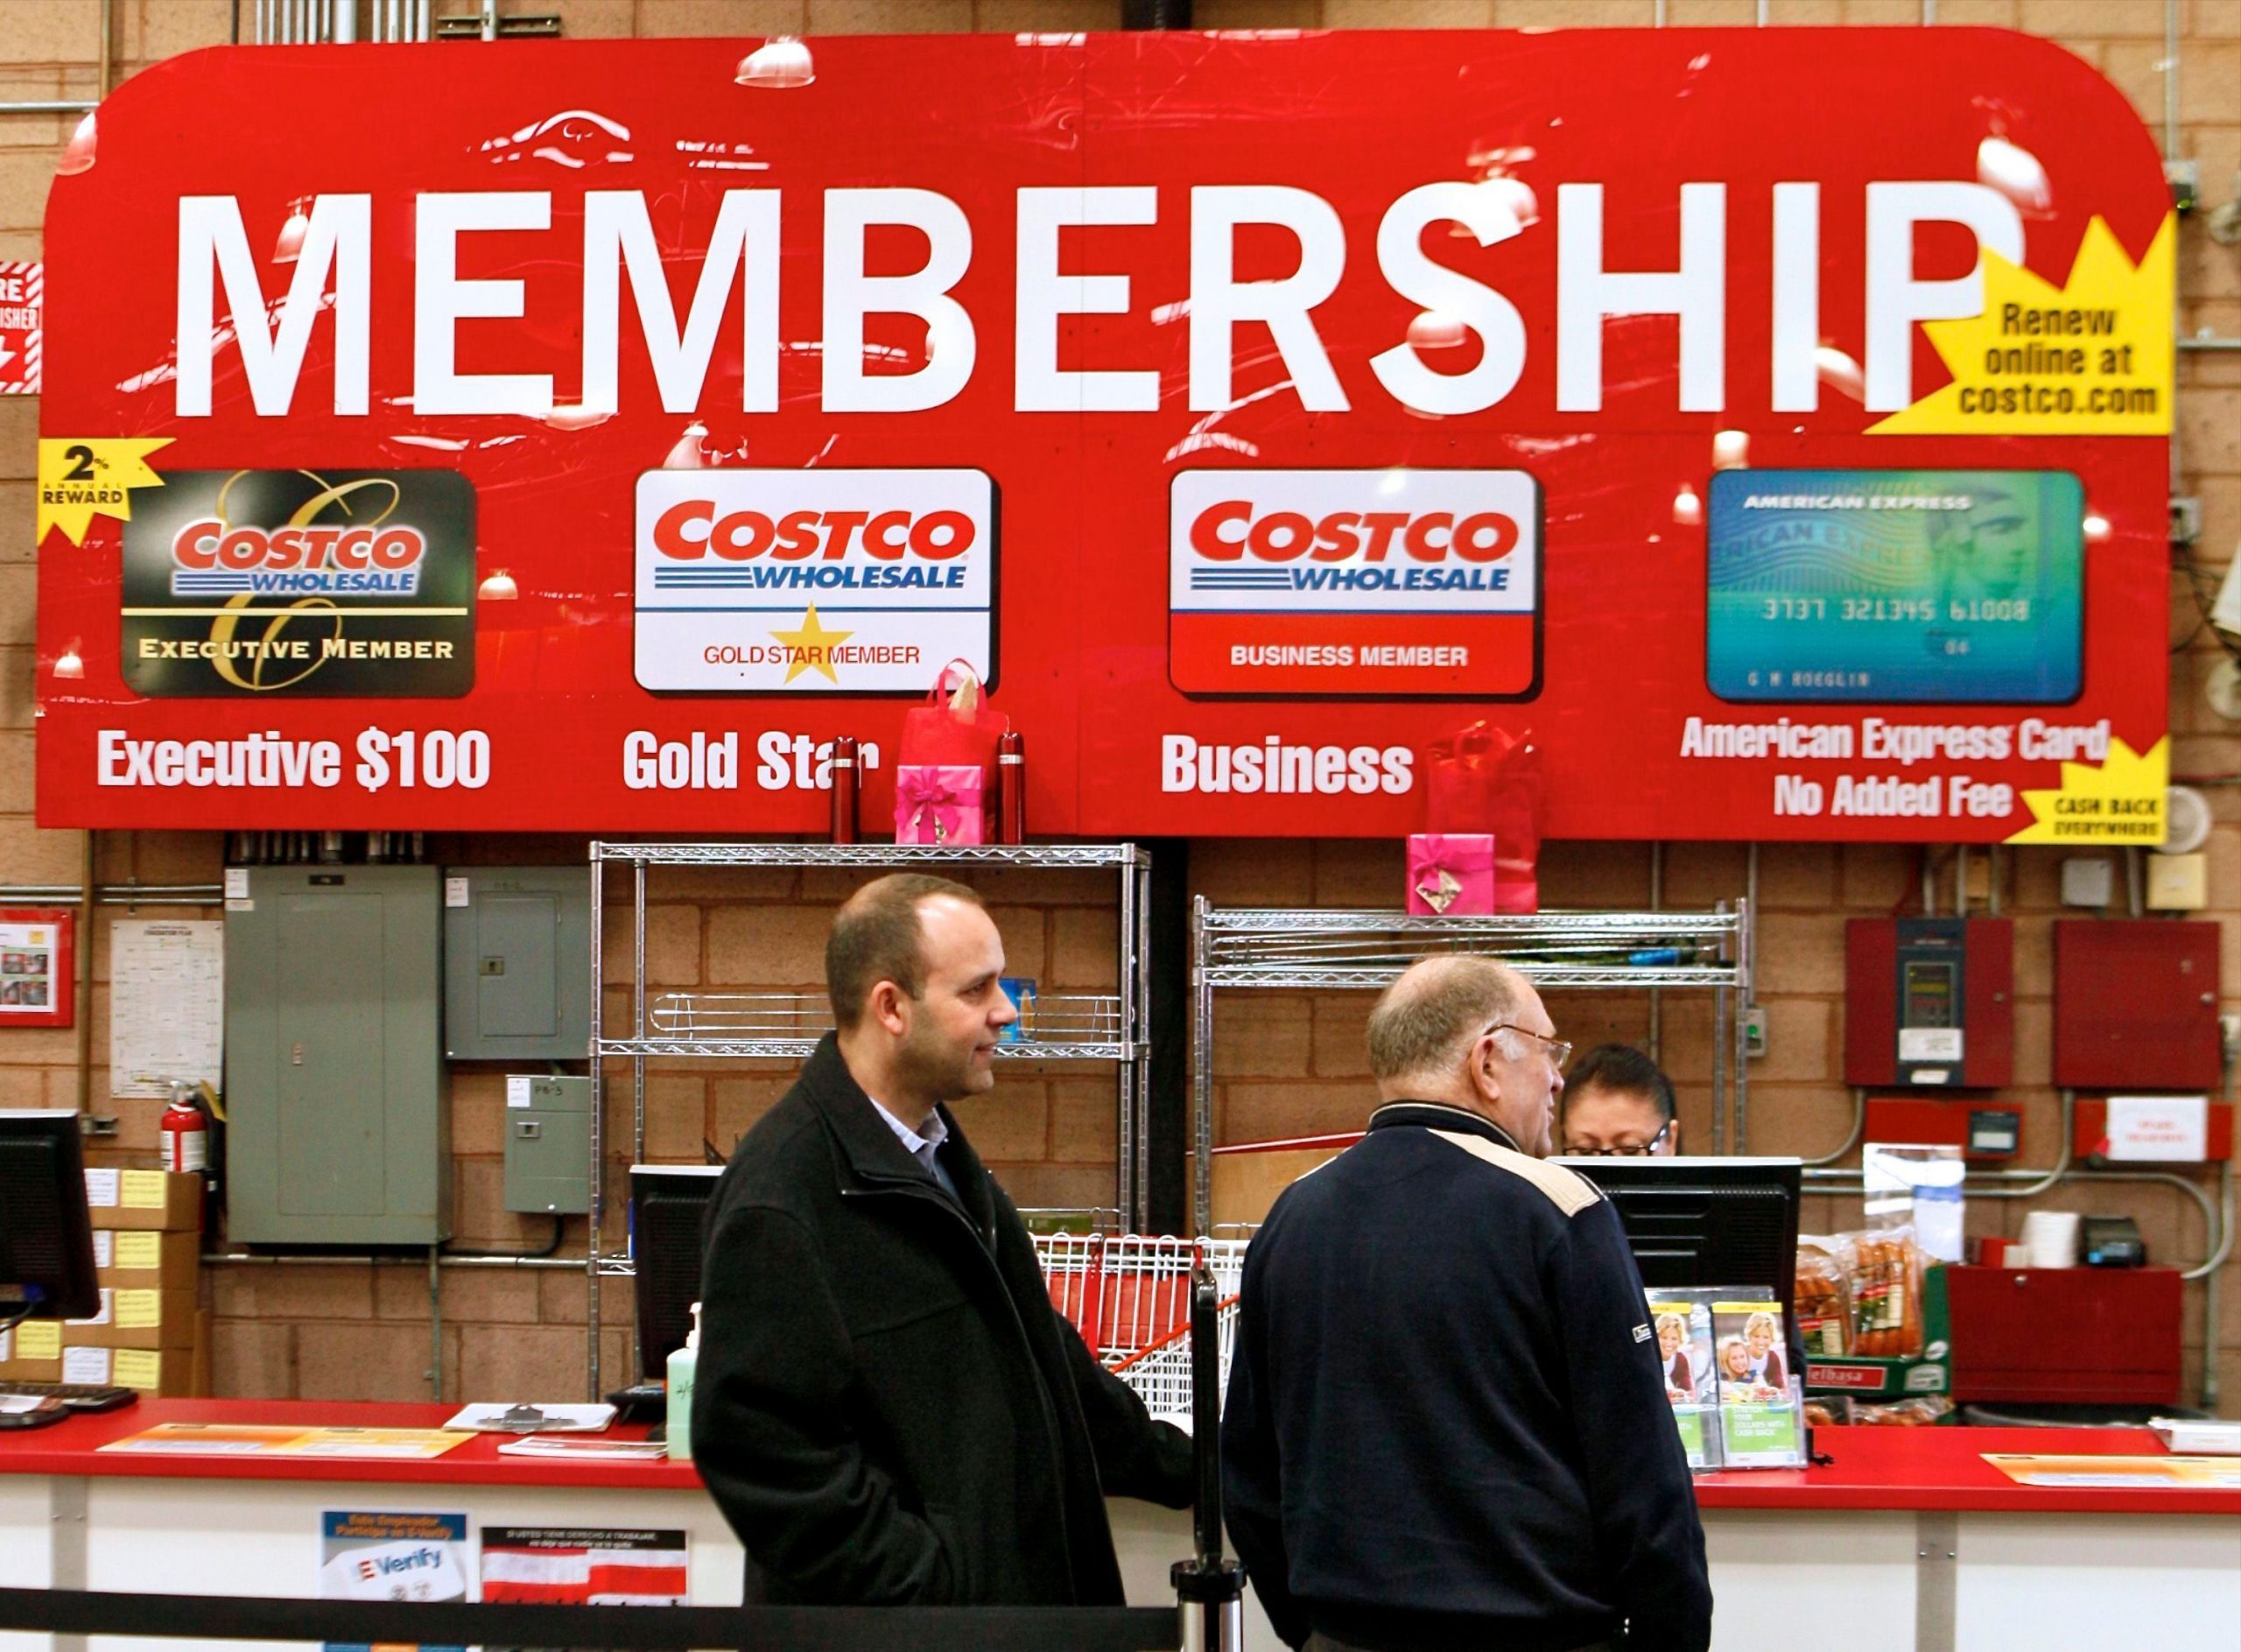 How Costco Gets Its Customers to Spend More Money